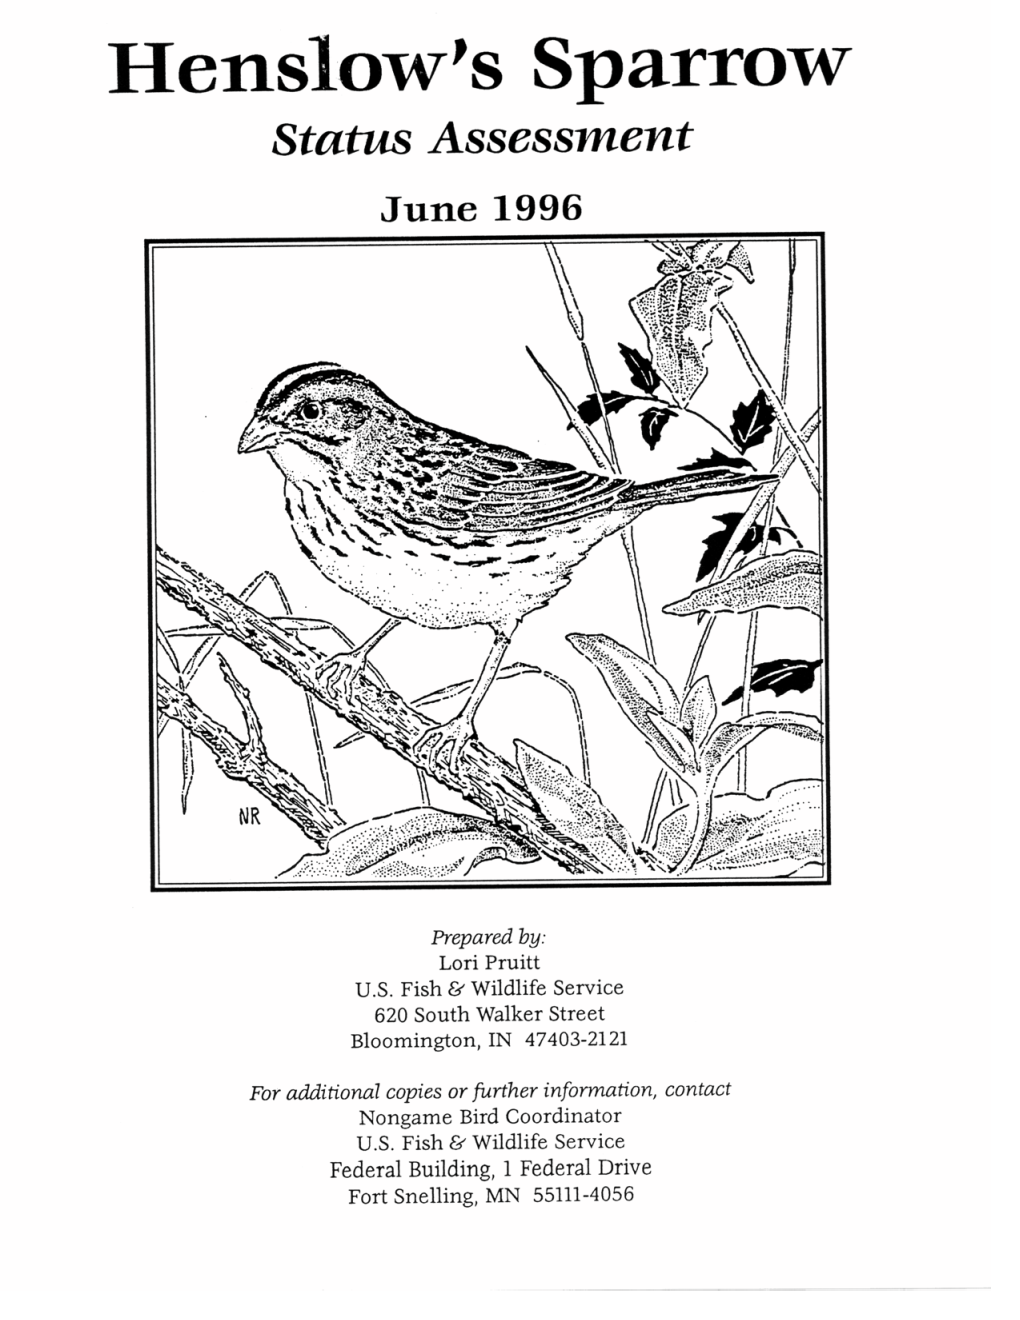 Status Assessment Includes Summaries of the Status of Henslow's Sparrow in 38 States and Canada, Which Make up the Current and Historic Range of the Species